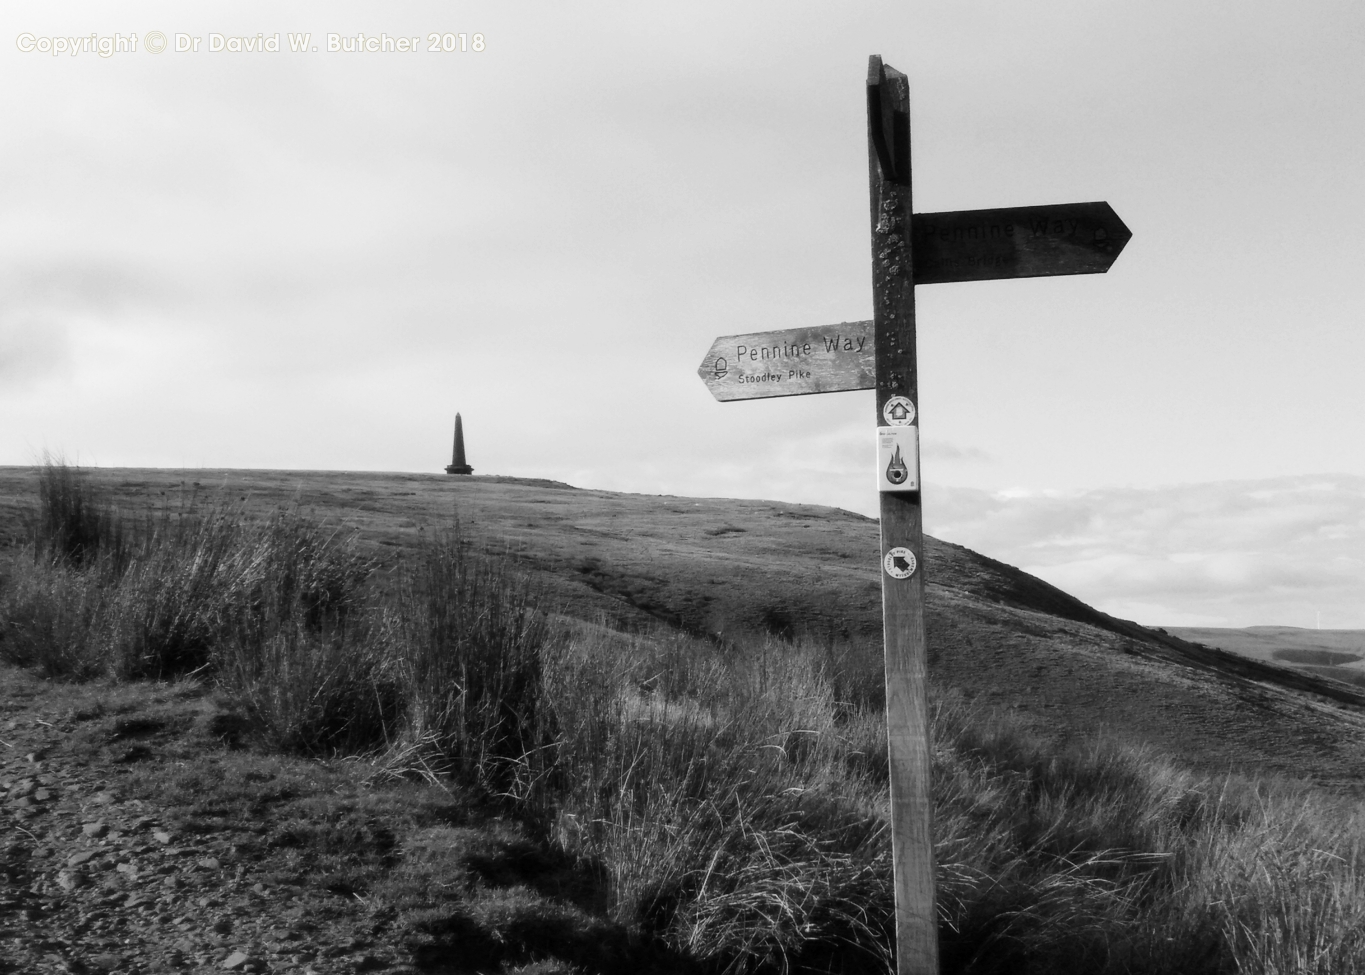 Stoodley Pike and Pennine Way sign